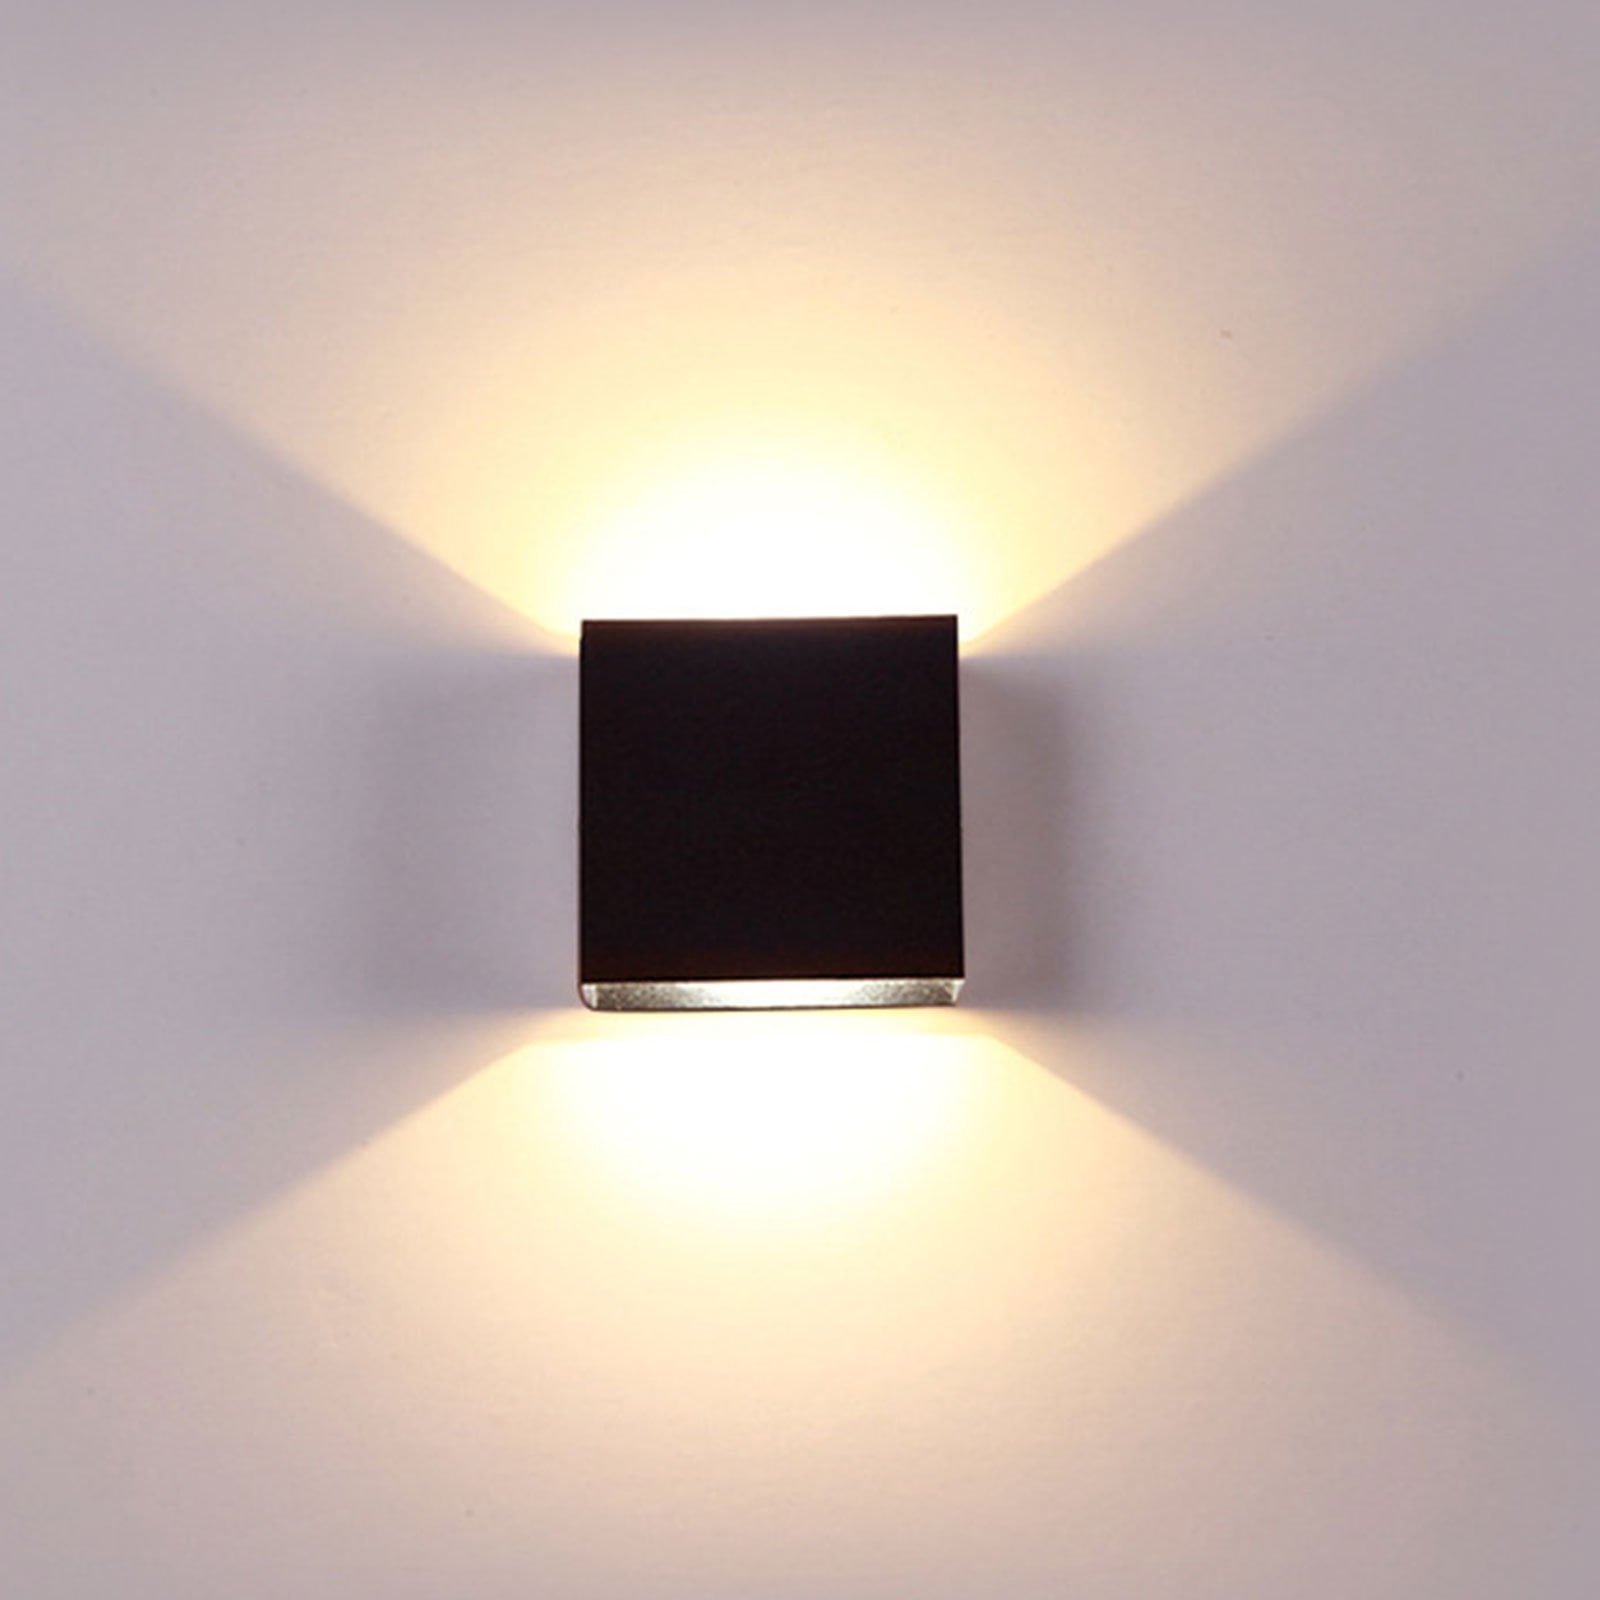 Modern LED Wall Light Up Down Cube Outdoor Indoor Sconce Lighting Lamp Fixtures 